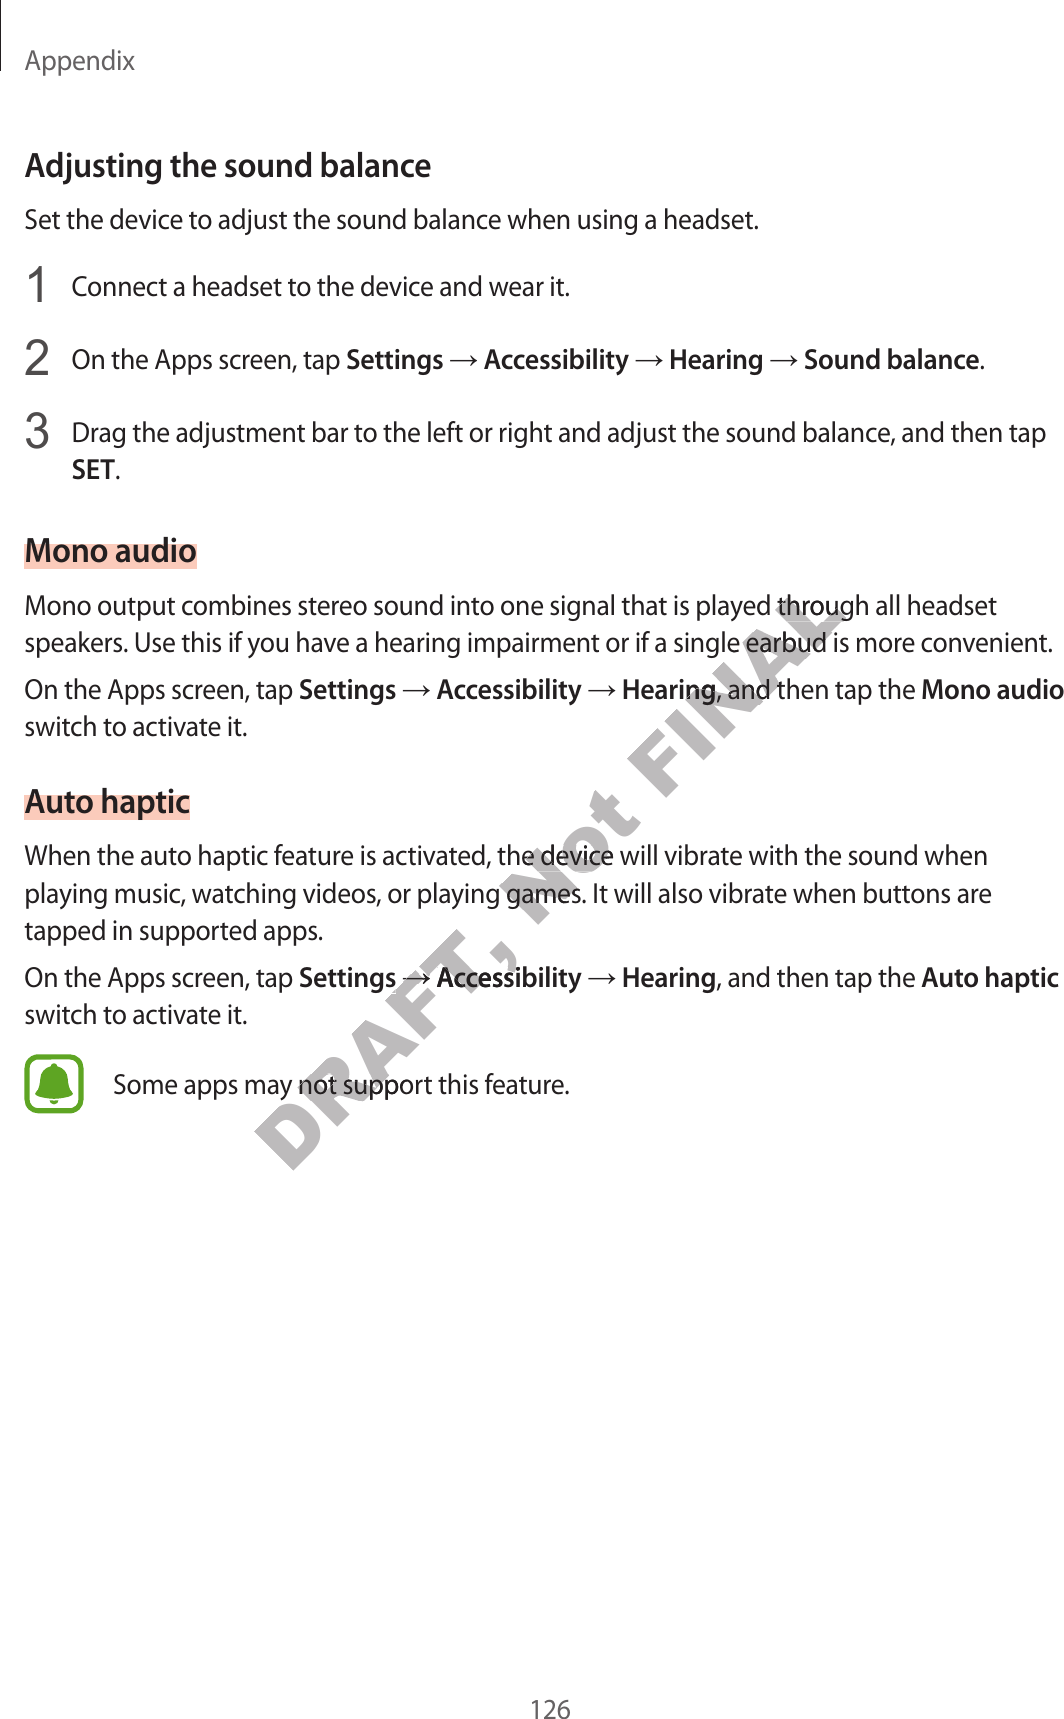 Appendix126Adjusting the sound balanc eSet the device to adjust the sound balance when using a headset.1  Connect a headset to the device and w ear it.2  On the Apps screen, tap Settings  Accessibility  Hearing  Sound balance.3  Drag the adjustment bar to the left or right and adjust the sound balance , and then tap SET.Mono audioMono output combines stereo sound in to one sig nal that is pla y ed thr ough all headset speakers. Use this if y ou ha v e a hearing impairment or if a single earbud is more c on v enien t.On the Apps screen, tap Settings  Accessibility  Hearing, and then tap the Mono audio switch to activate it.Aut o hapticWhen the auto haptic f ea tur e is activated , the device will vibr at e with the sound when playing music , wat ching videos , or pla ying games . It will also vibrate when buttons ar e tapped in supported apps.On the Apps screen, tap Settings  Accessibility  Hearing, and then tap the Aut o haptic switch to activate it.Some apps may not support this featur e .DRAFT, playing music , wat ching videos , or pla ying games . It will also vibrate when buttons ar e DRAFT, playing music , wat ching videos , or pla ying games . It will also vibrate when buttons ar e SettingsDRAFT, SettingsDRAFT, DRAFT, AccessibilityDRAFT, AccessibilitySome apps may not support this featur e .DRAFT, Some apps may not support this featur e .Not When the auto haptic f ea tur e is activated , the device will vibr at e with the sound when Not When the auto haptic f ea tur e is activated , the device will vibr at e with the sound when playing music , wat ching videos , or pla ying games . It will also vibrate when buttons ar e Not playing music , wat ching videos , or pla ying games . It will also vibrate when buttons ar e FINALMono output combines stereo sound in to one sig nal that is pla y ed thr ough all headset FINALMono output combines stereo sound in to one sig nal that is pla y ed thr ough all headset speakers. Use this if y ou ha v e a hearing impairment or if a single earbud is more c on v enien t.FINALspeakers. Use this if y ou ha v e a hearing impairment or if a single earbud is more c on v enien t.HearingFINALHearing, and then tap the FINAL, and then tap the 